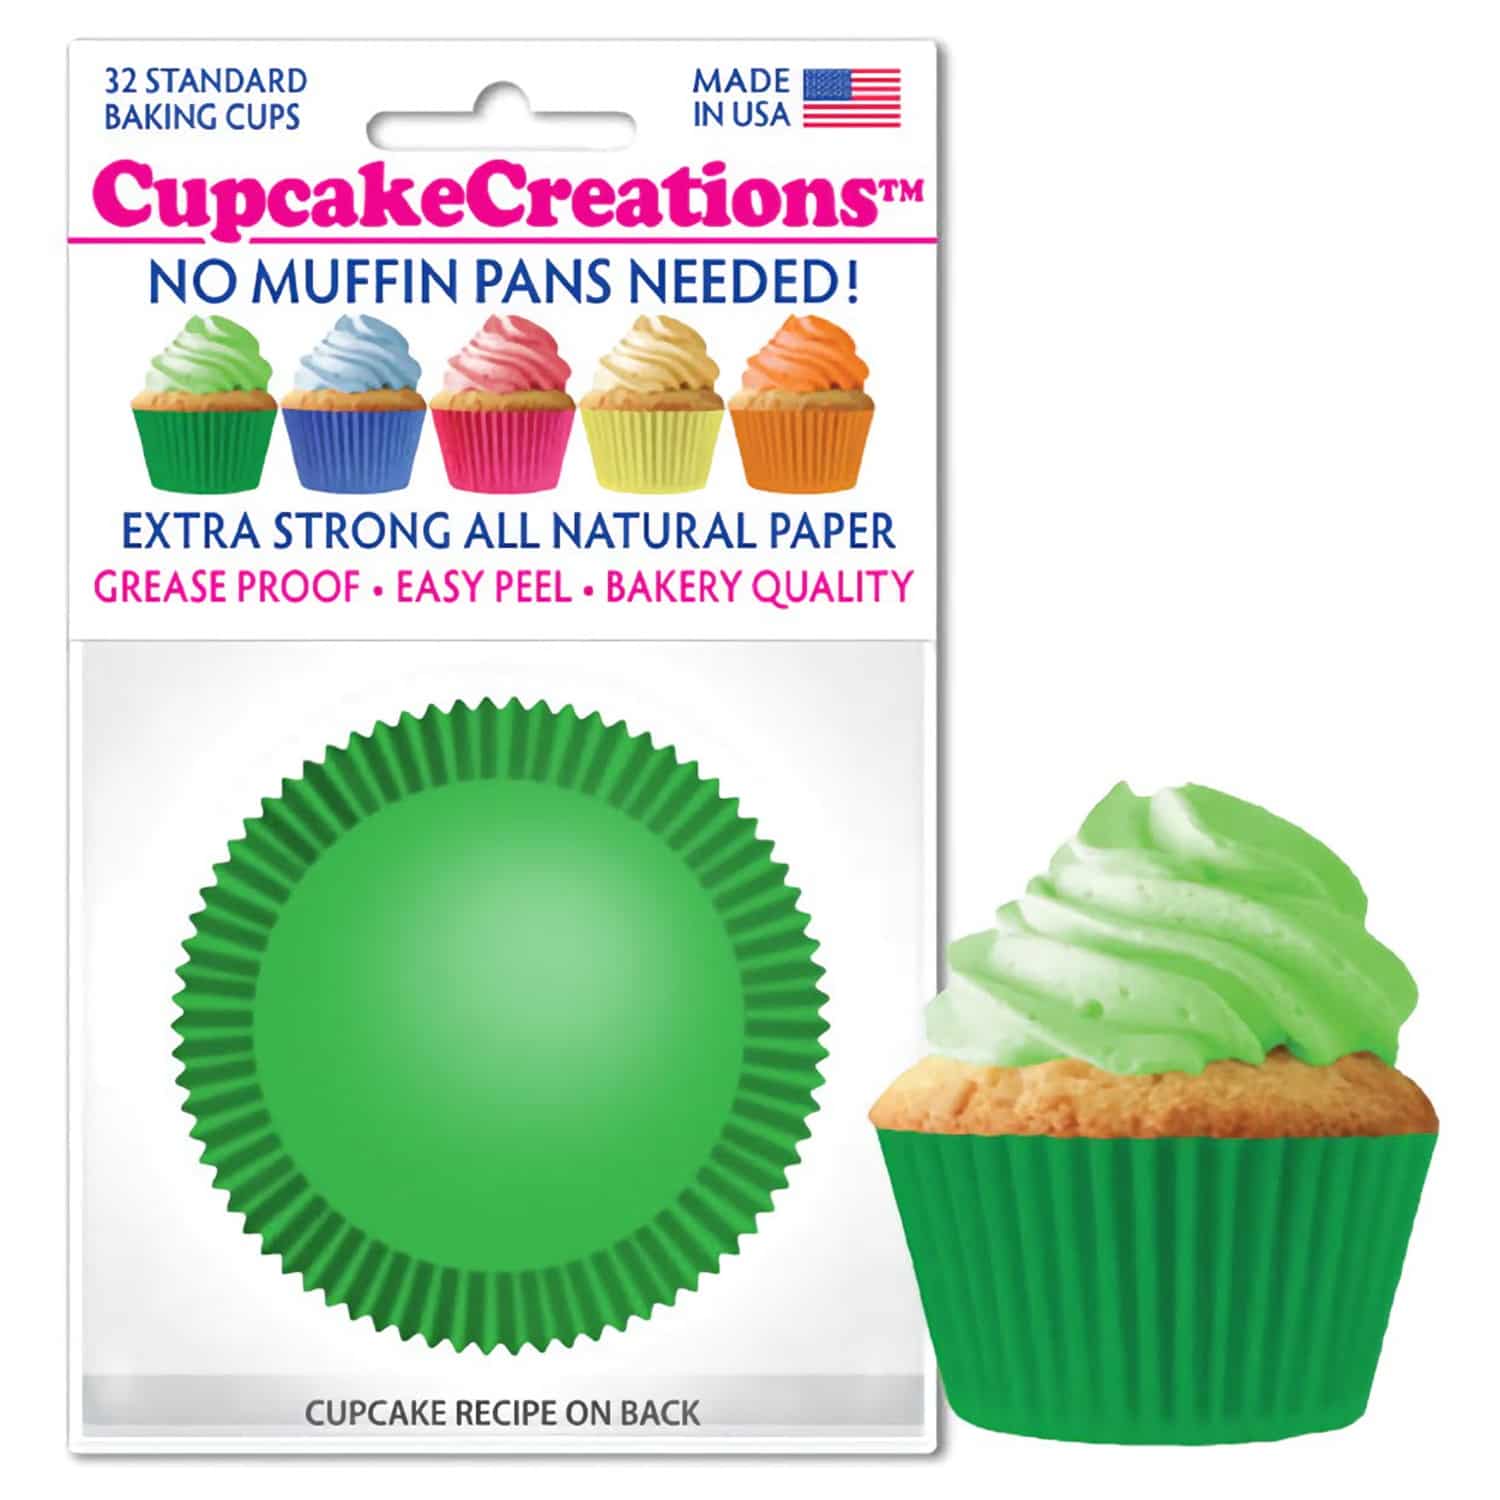 Pack of thirty-two standard-sized green baking cups, featuring extra-strong all-natural paper, greaseproof and easy-peel qualities for a professional bakery look, ideal for making St. Patrick's Day themed cupcakes or muffins.